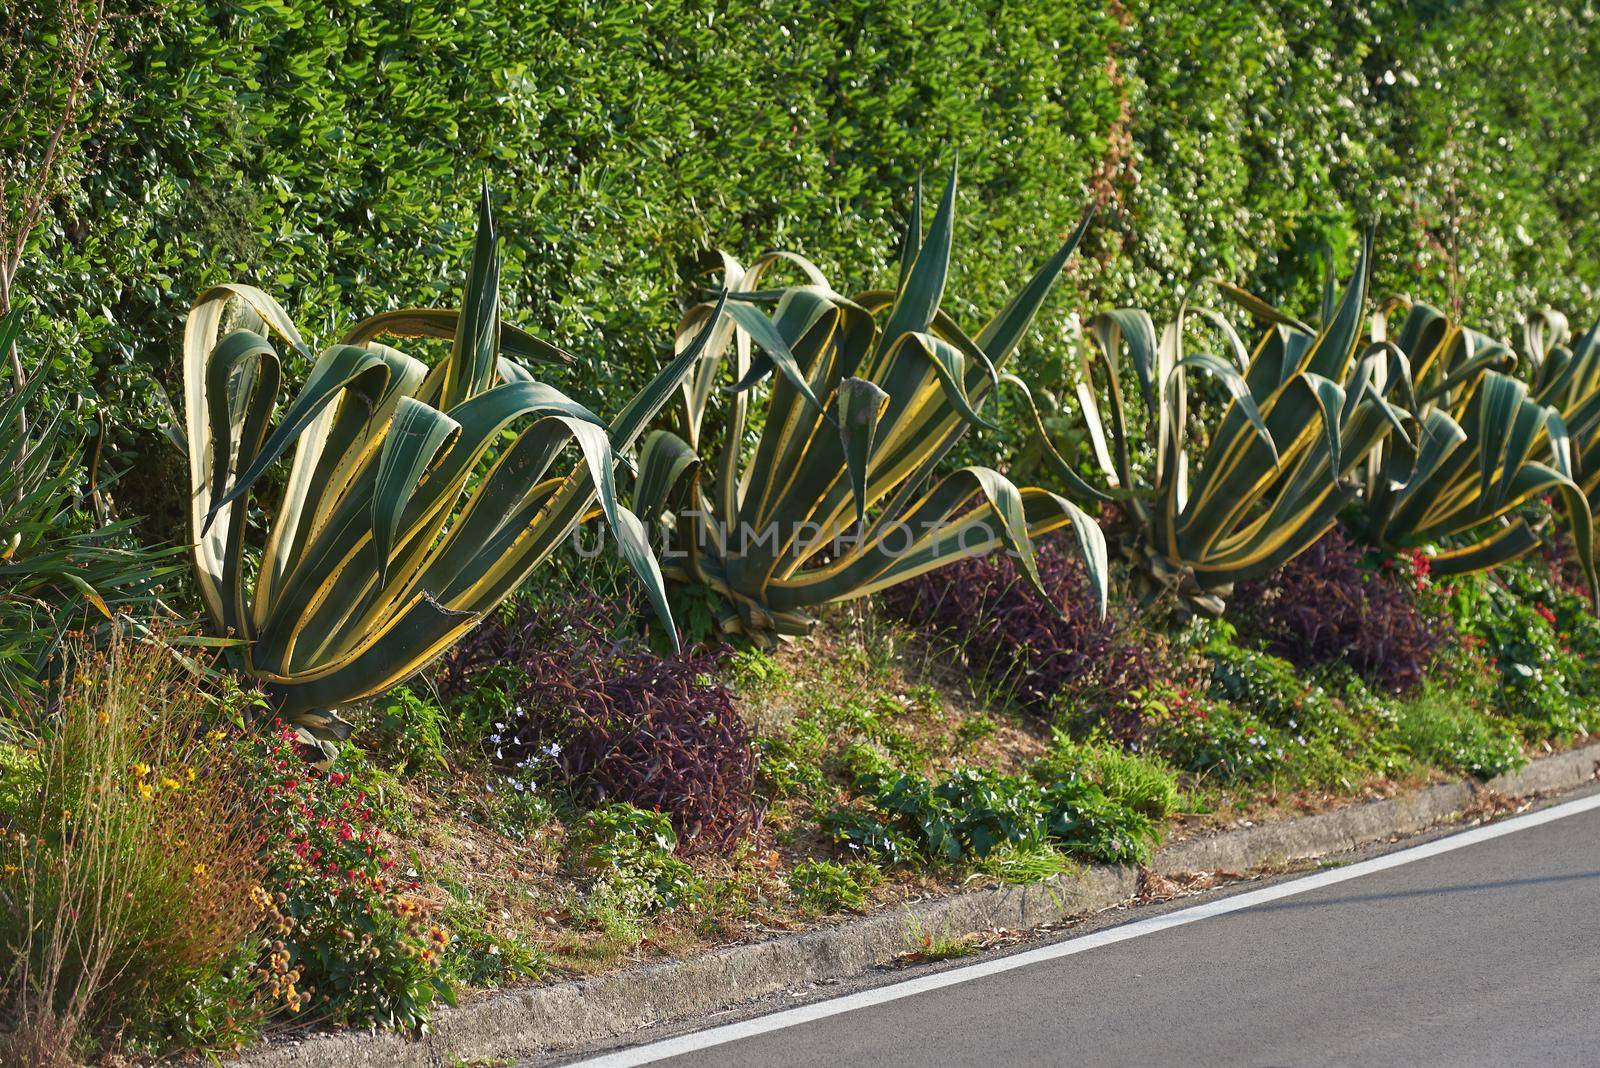 Large aloe grows along the road in Montenegro.